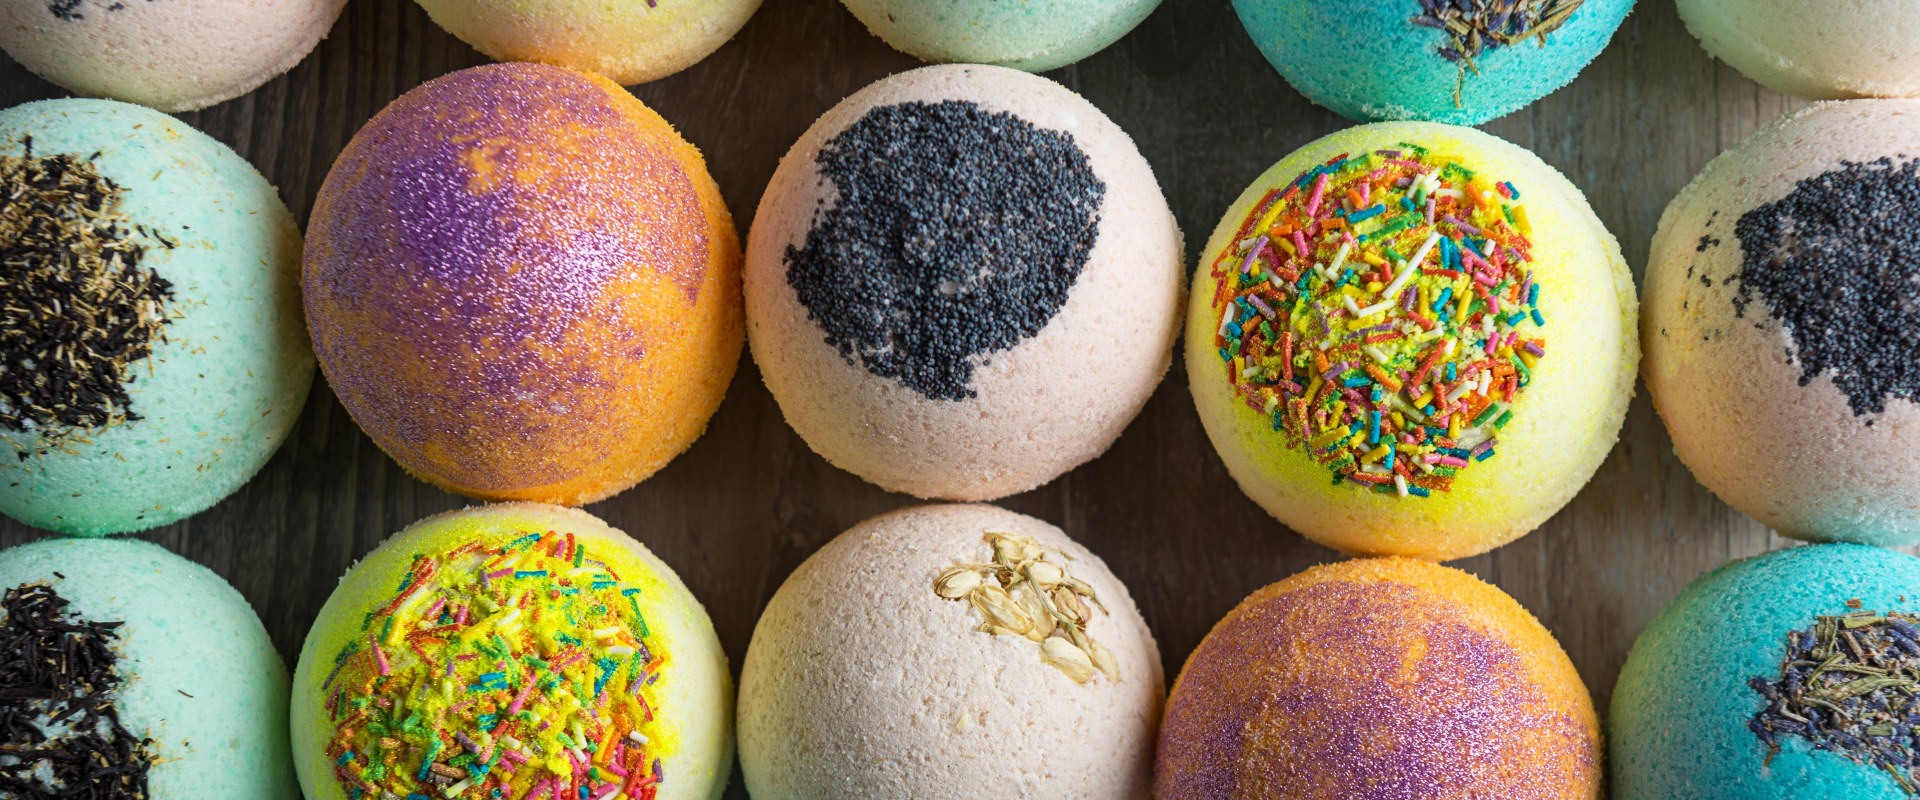 What's wrong with bath bombs?